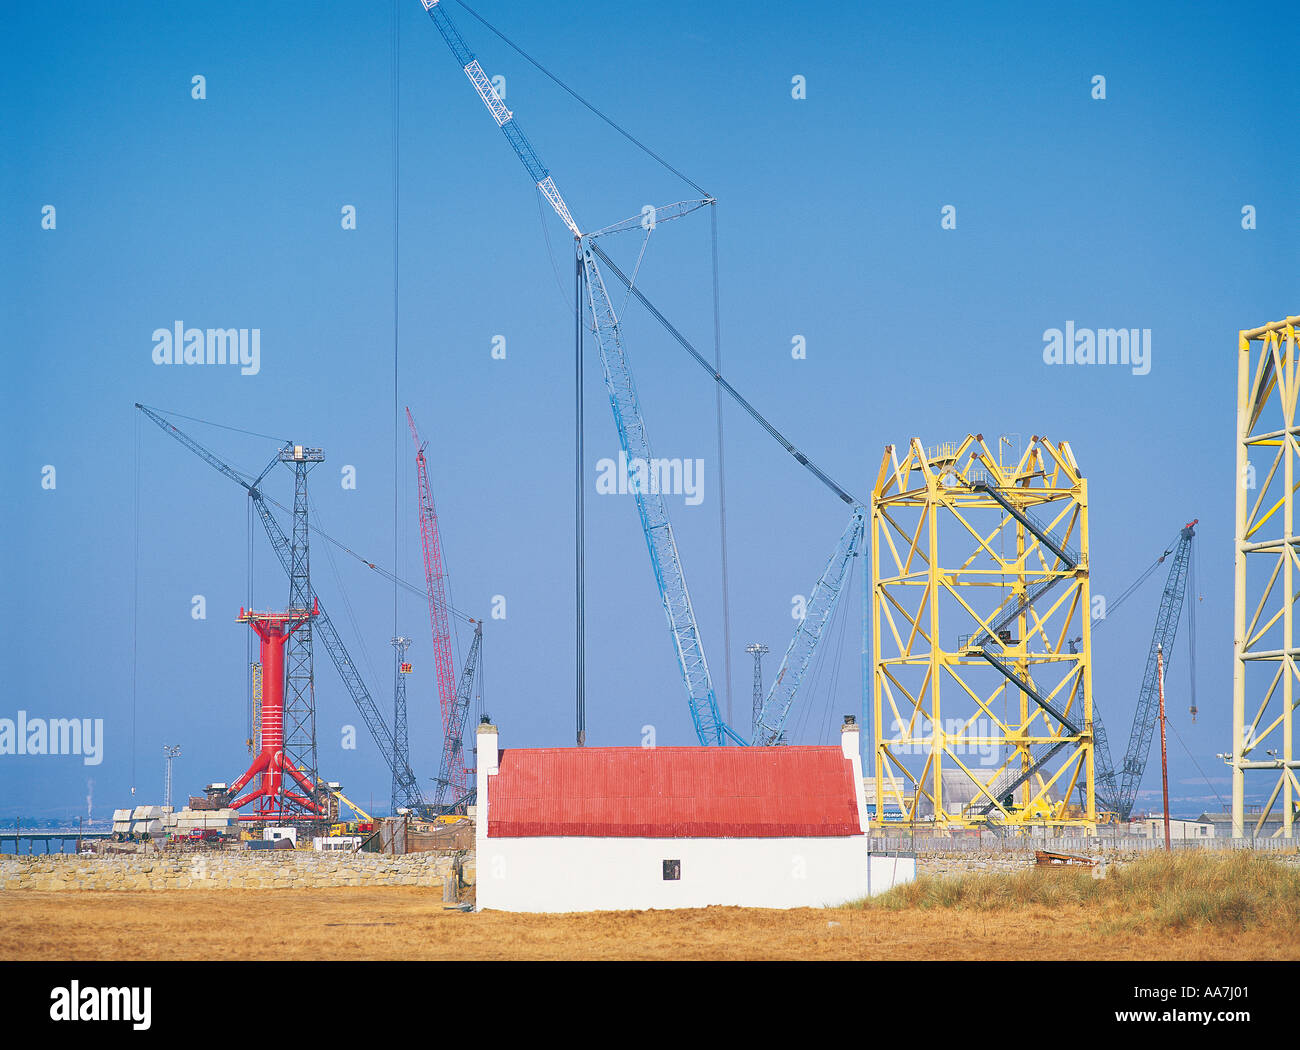 Oil rig platform construction and old cottage at Nigg on the Cromarty Firth, Scotland at height of North Sea oil industry boom Stock Photo